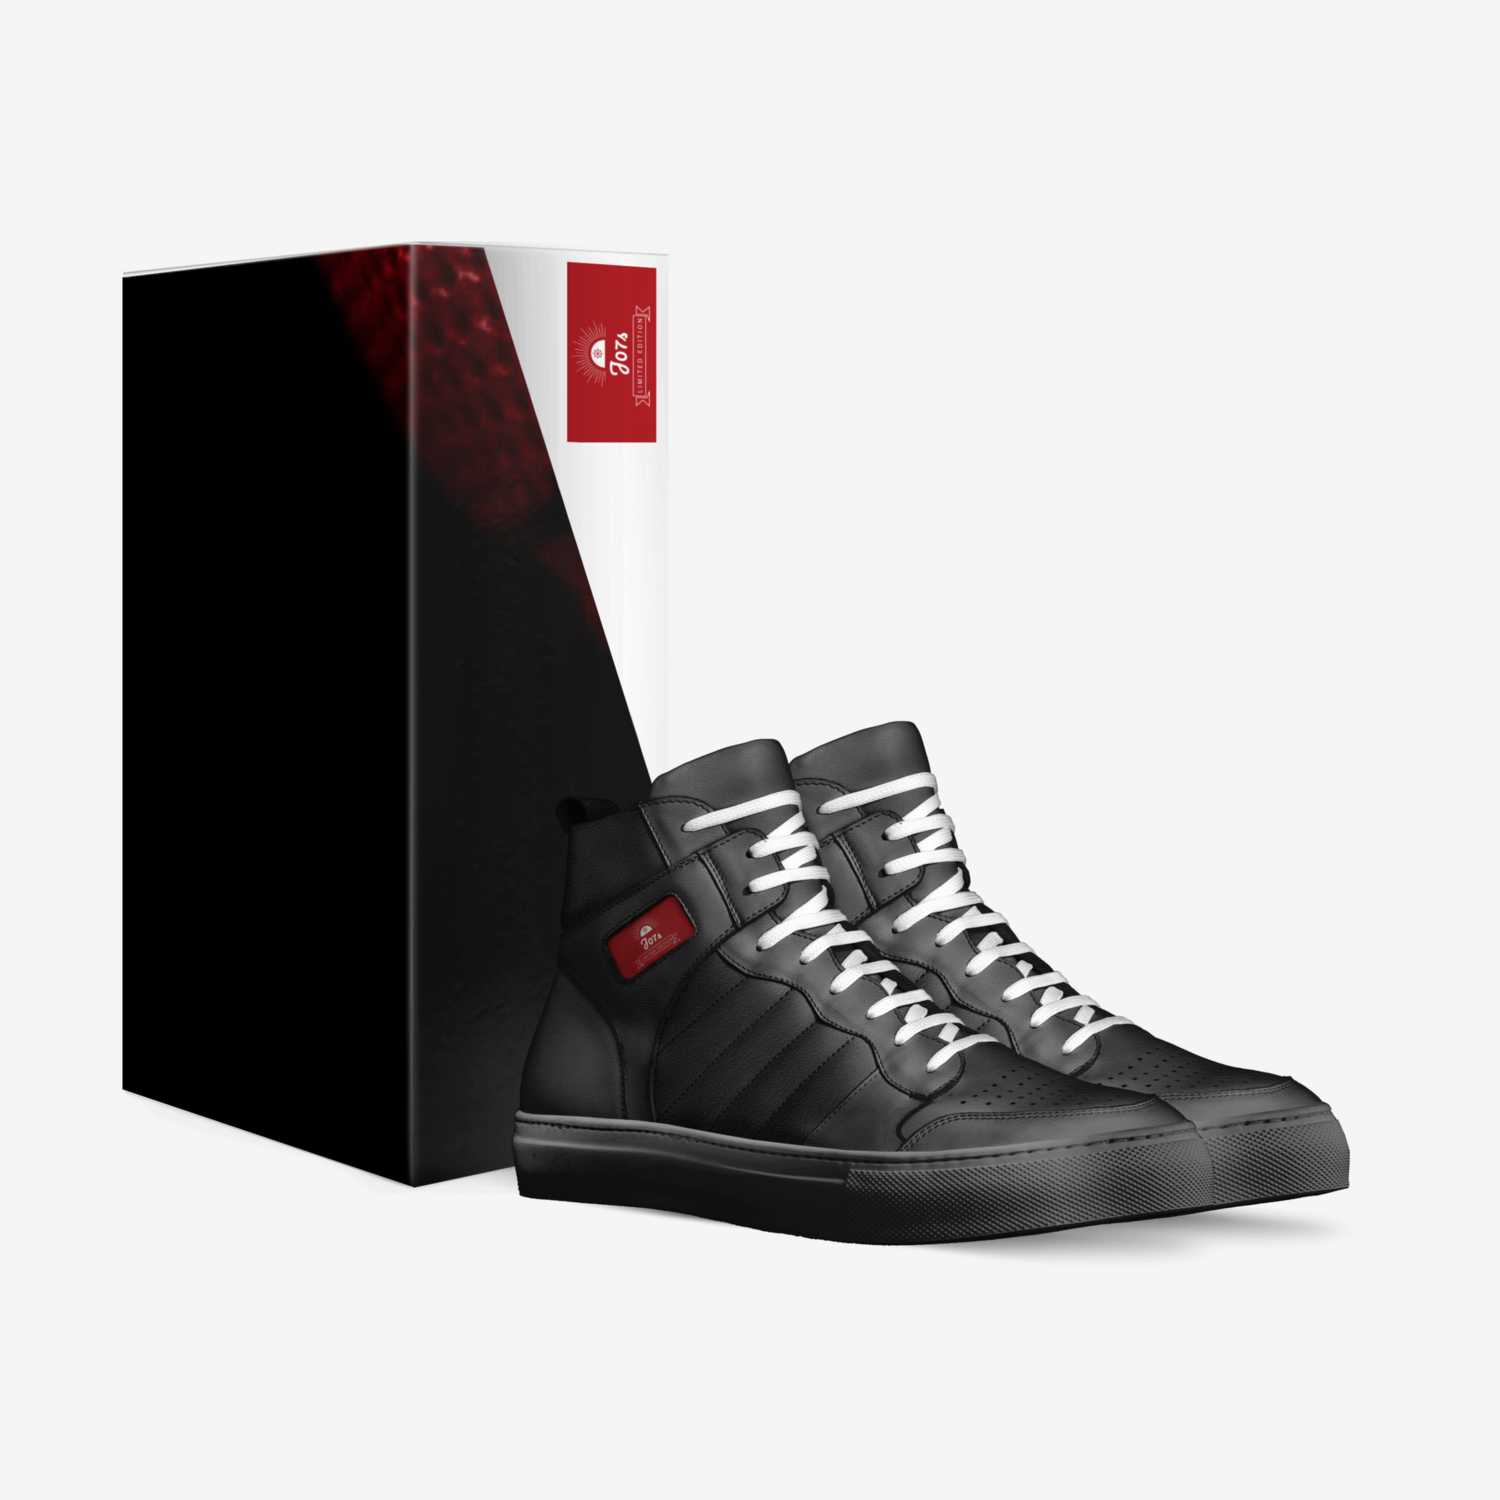 J07s custom made in Italy shoes by Julian Garcia | Box view